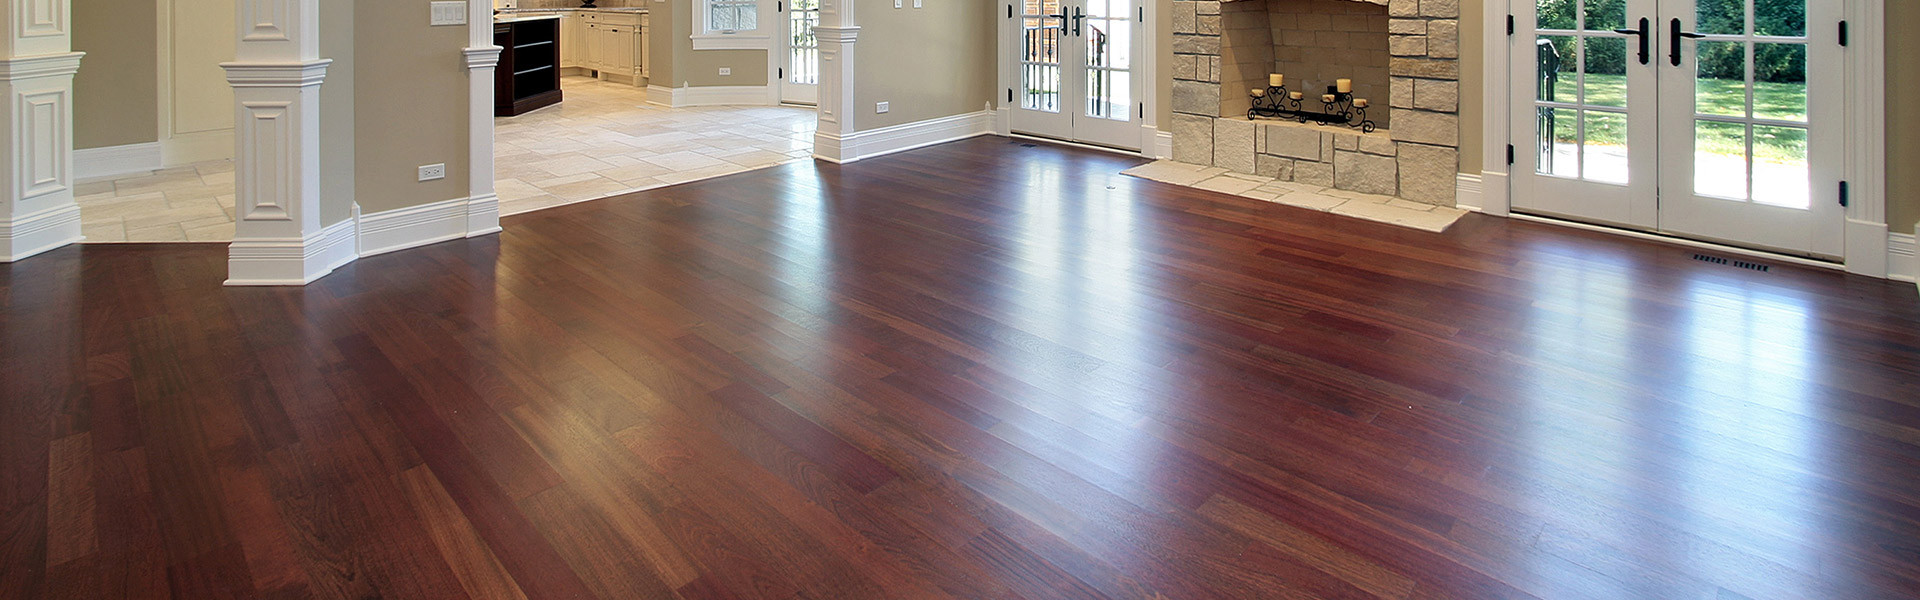 15 Awesome Knoxville Hardwood Floor Refinishing 2024 free download knoxville hardwood floor refinishing of flooring installation contractor in knoxville tile wood floors intended for professional hardwood flooring installer with over 30 years of experience